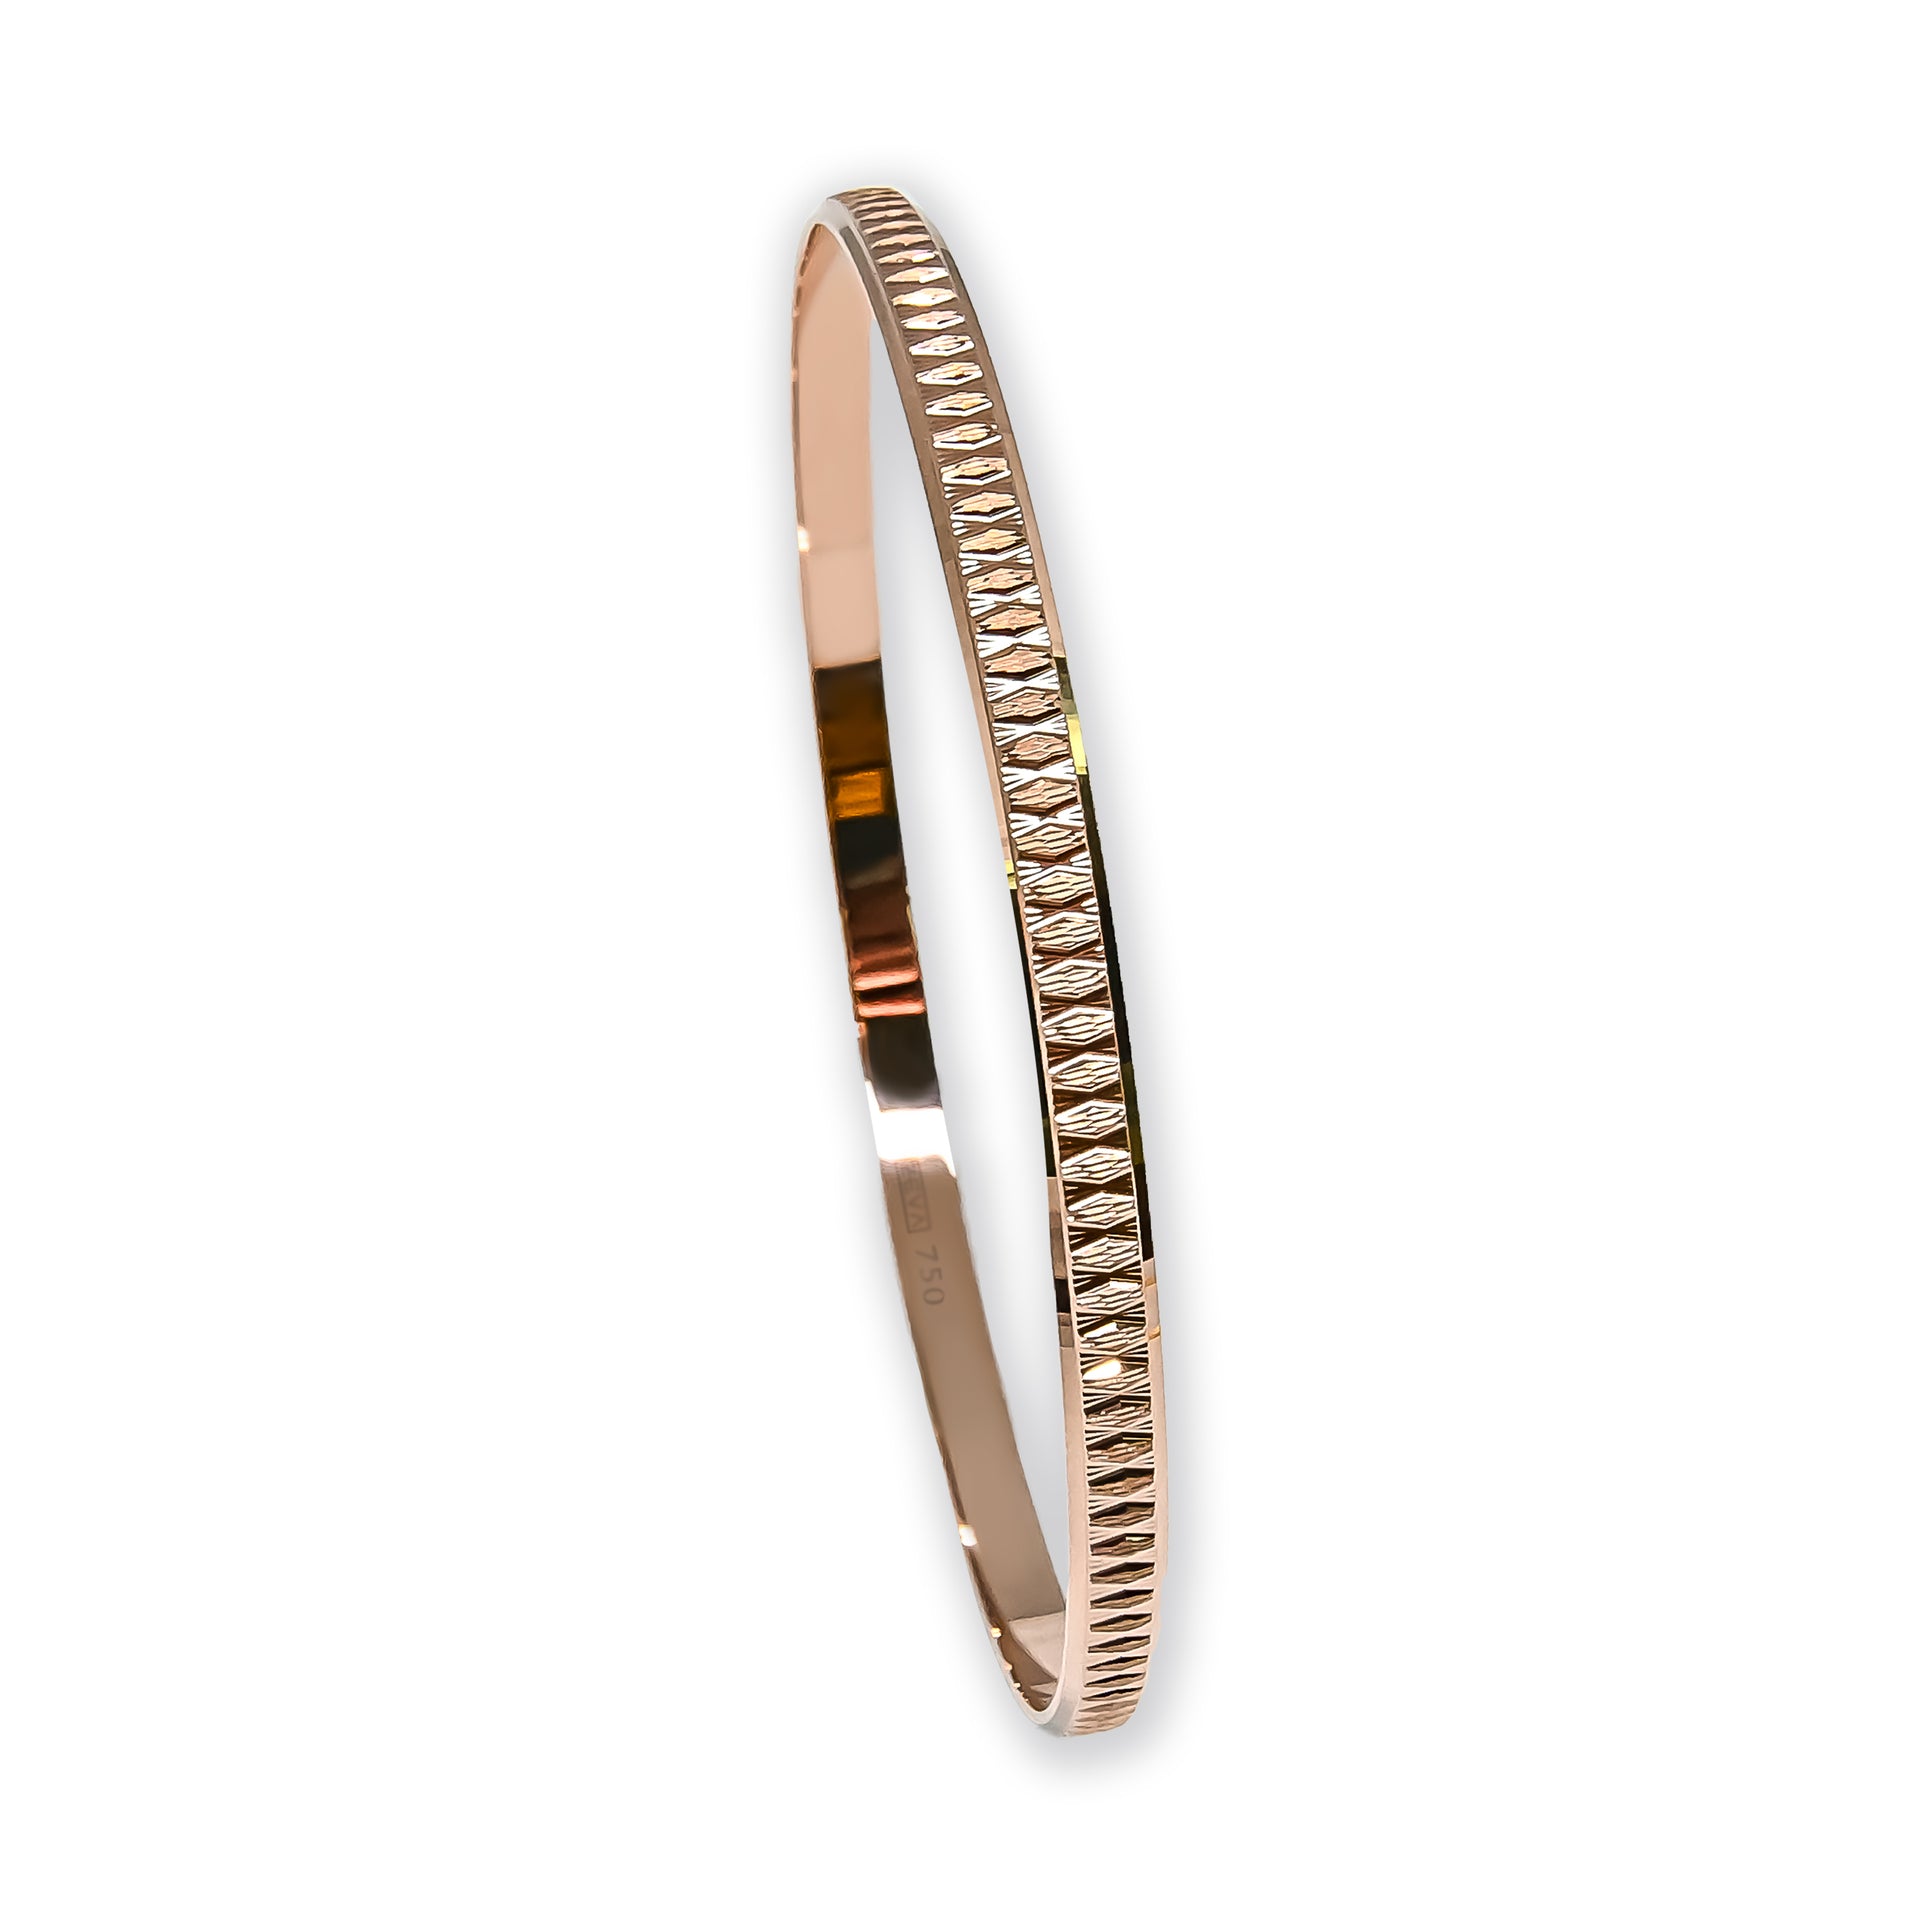 Bangle EARTH IS ROUND 3mm losange pattern red gold 18k 750